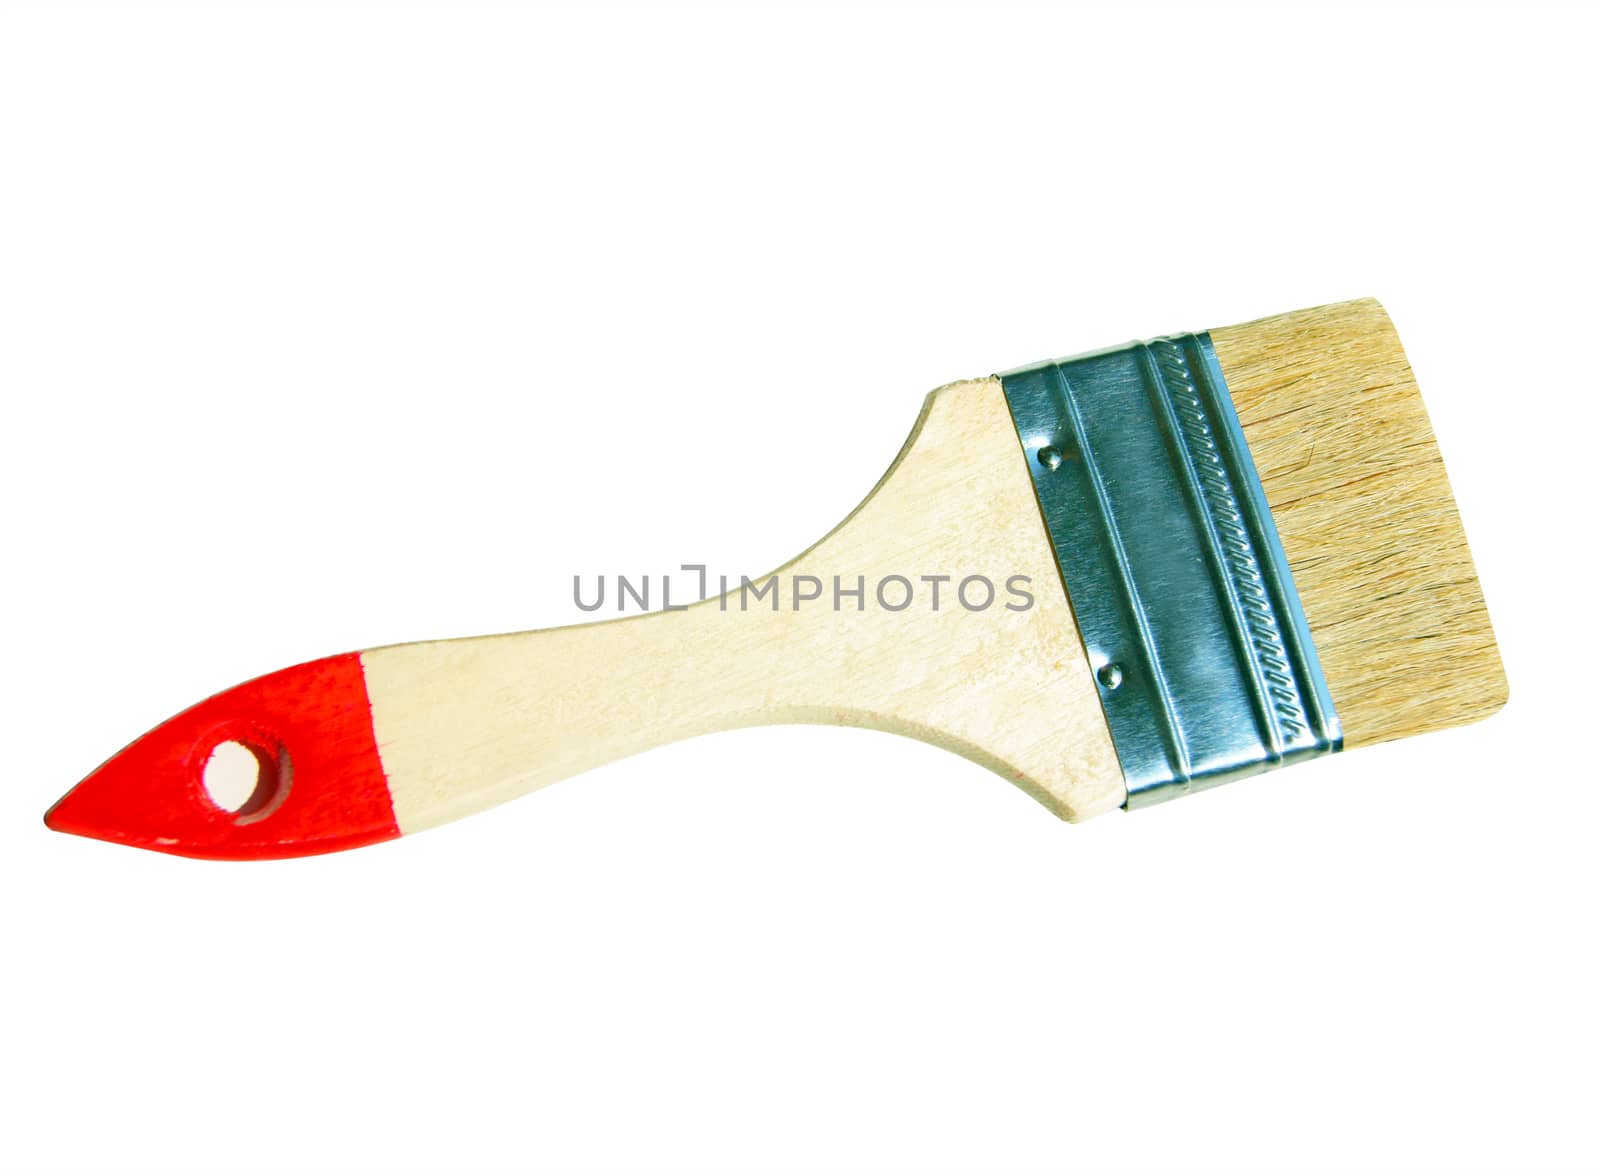 Paint brush on white background by cobol1964